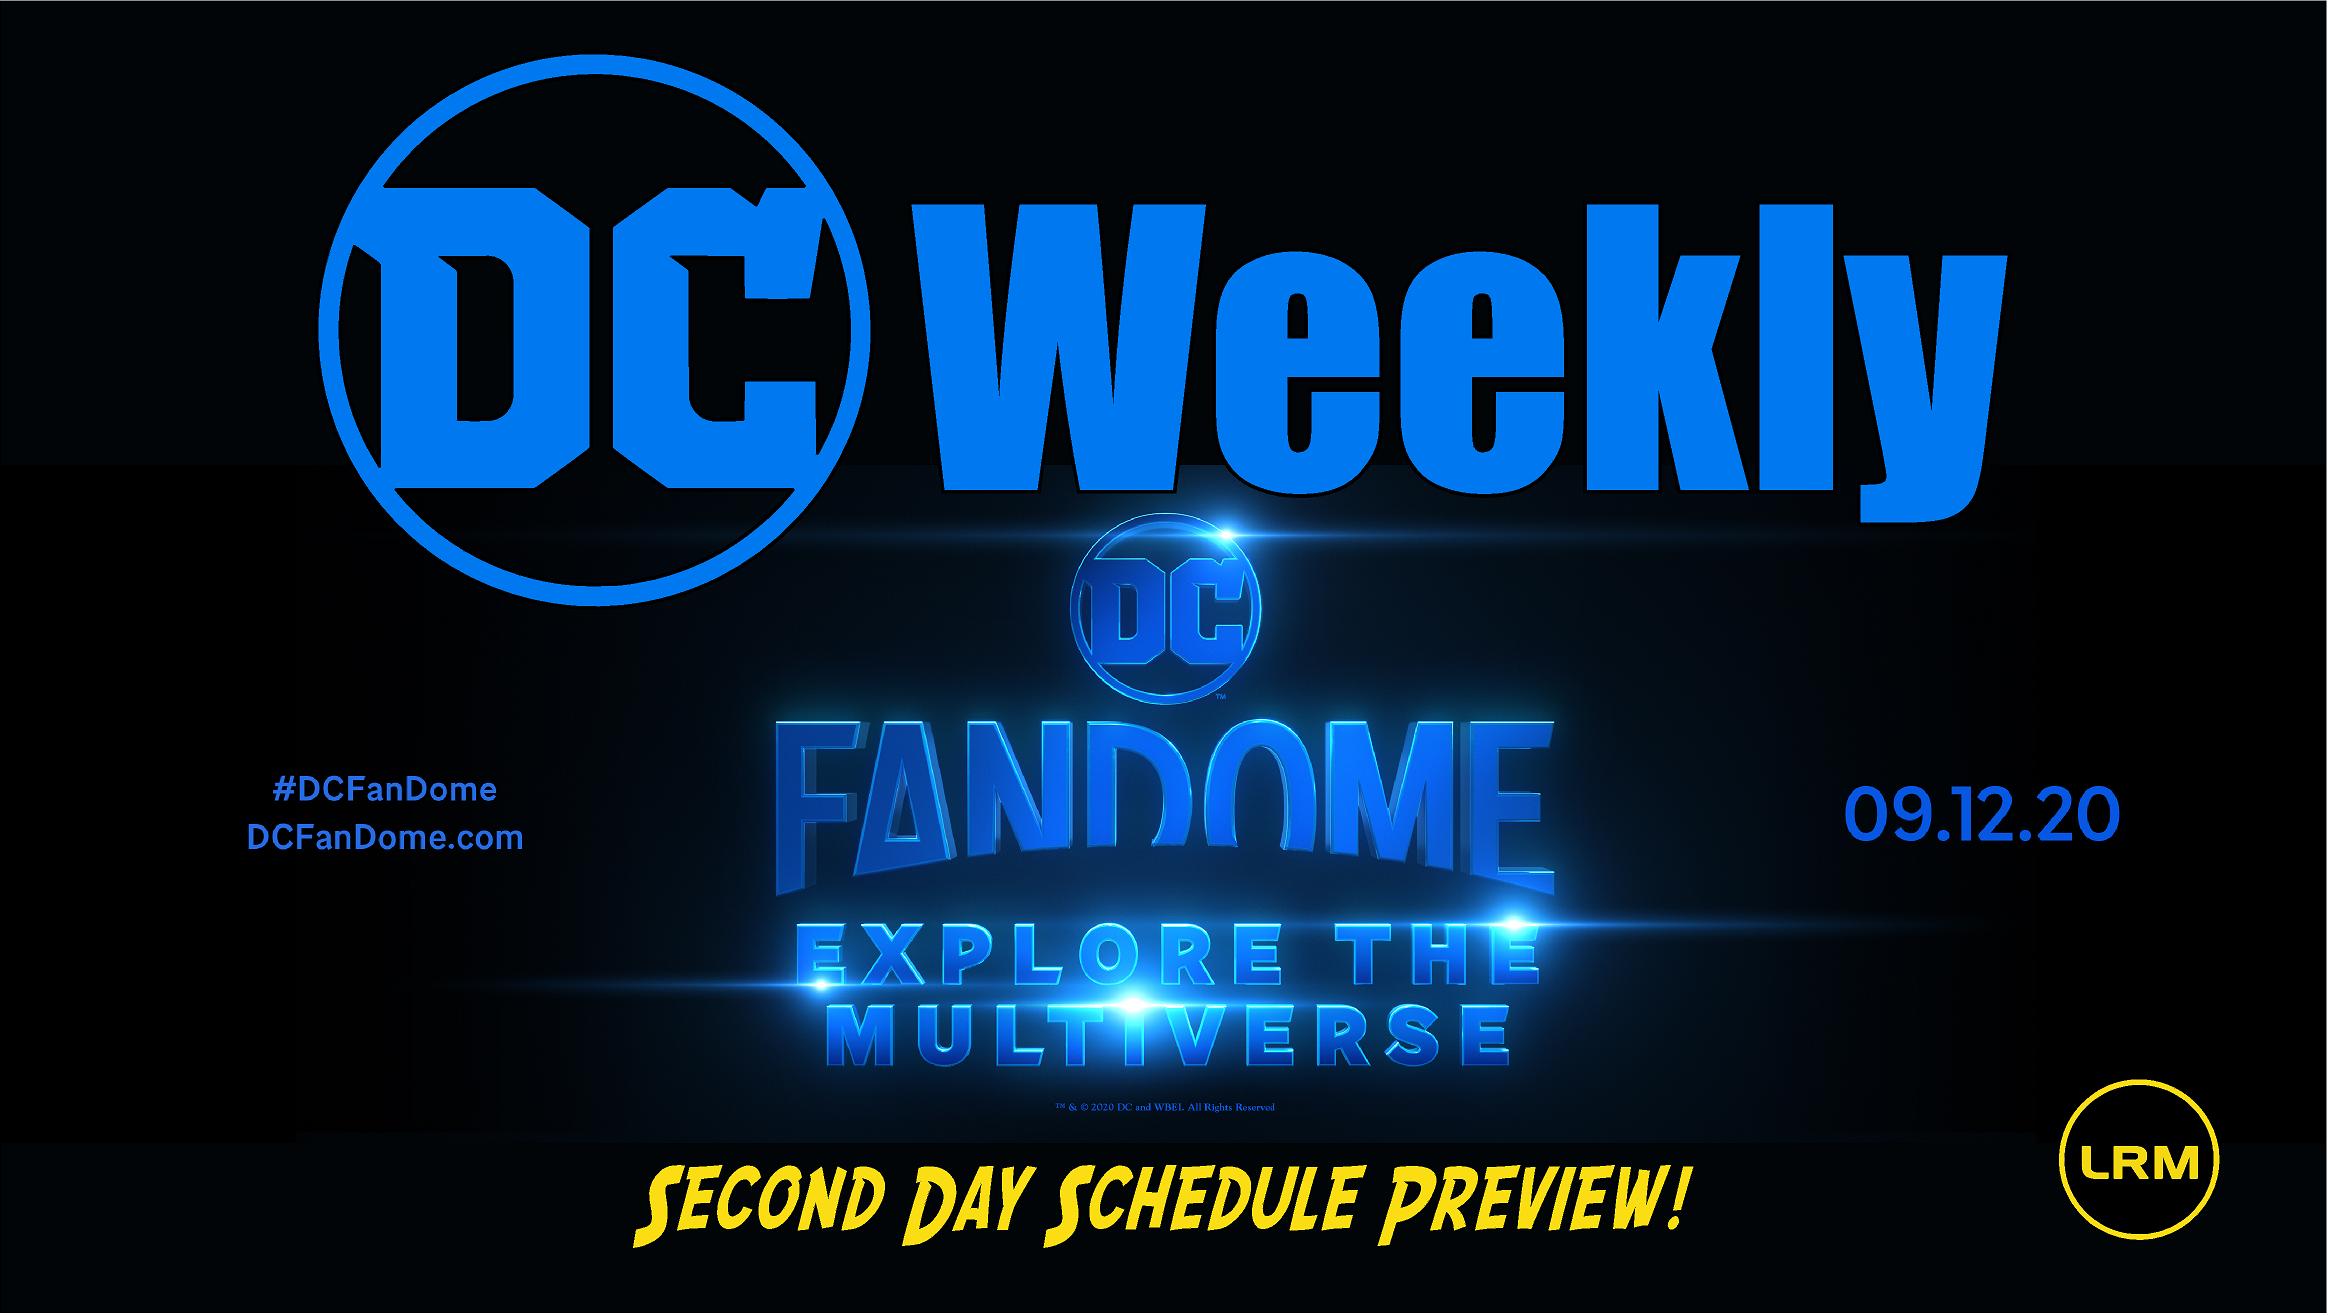 DC Weekly: DC FanDome Explore The Multiverse Preview!